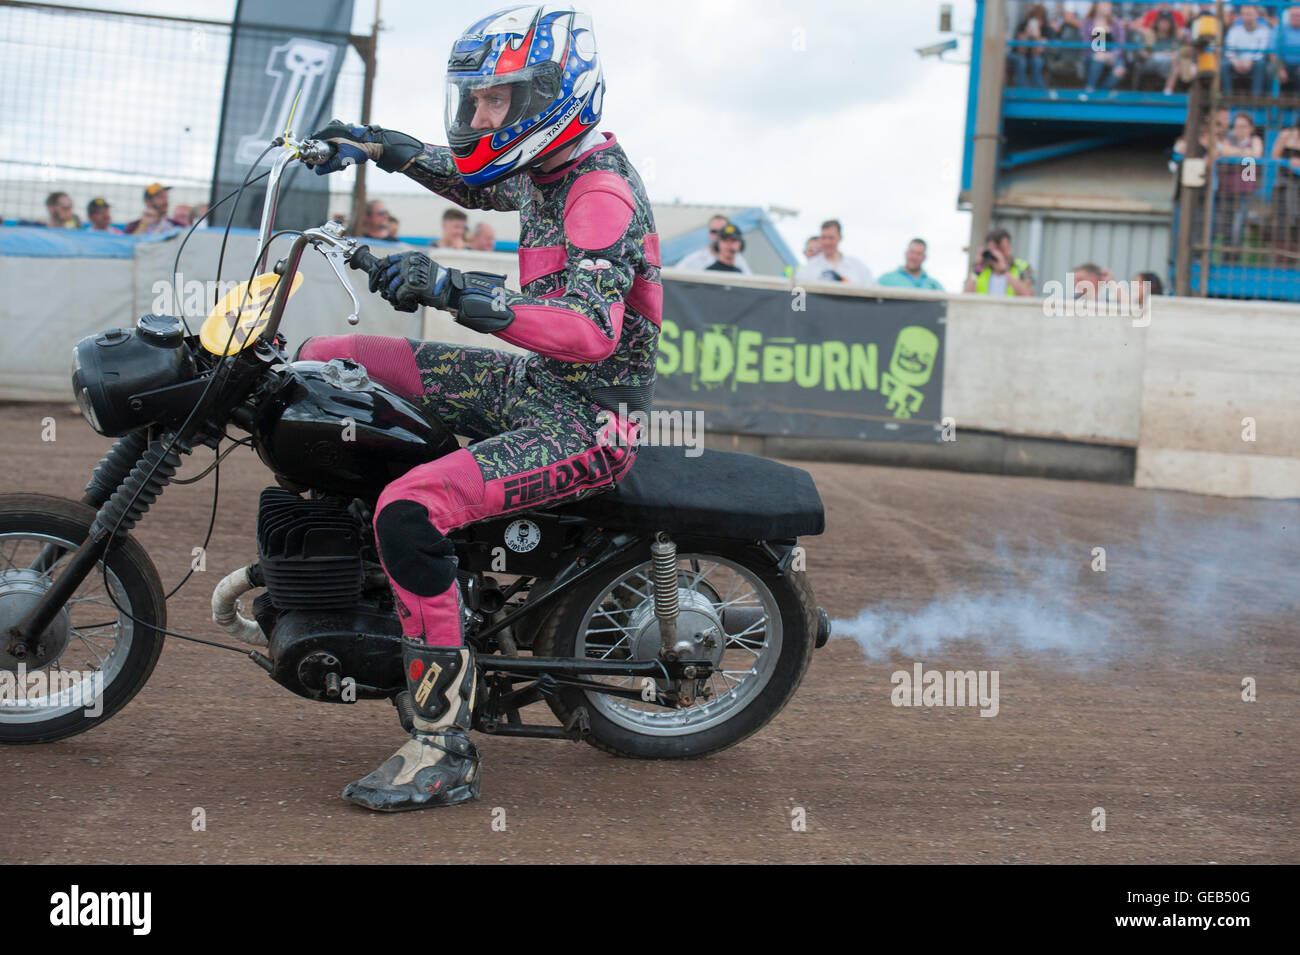 Kings Lynn, Norfolk, United Kingdom. 16.07.2016. Fifth annual Dirt Quake festival with Guy Martin and Carl 'Foggy' Fogarty. A man races in retro pink leathers. Stock Photo